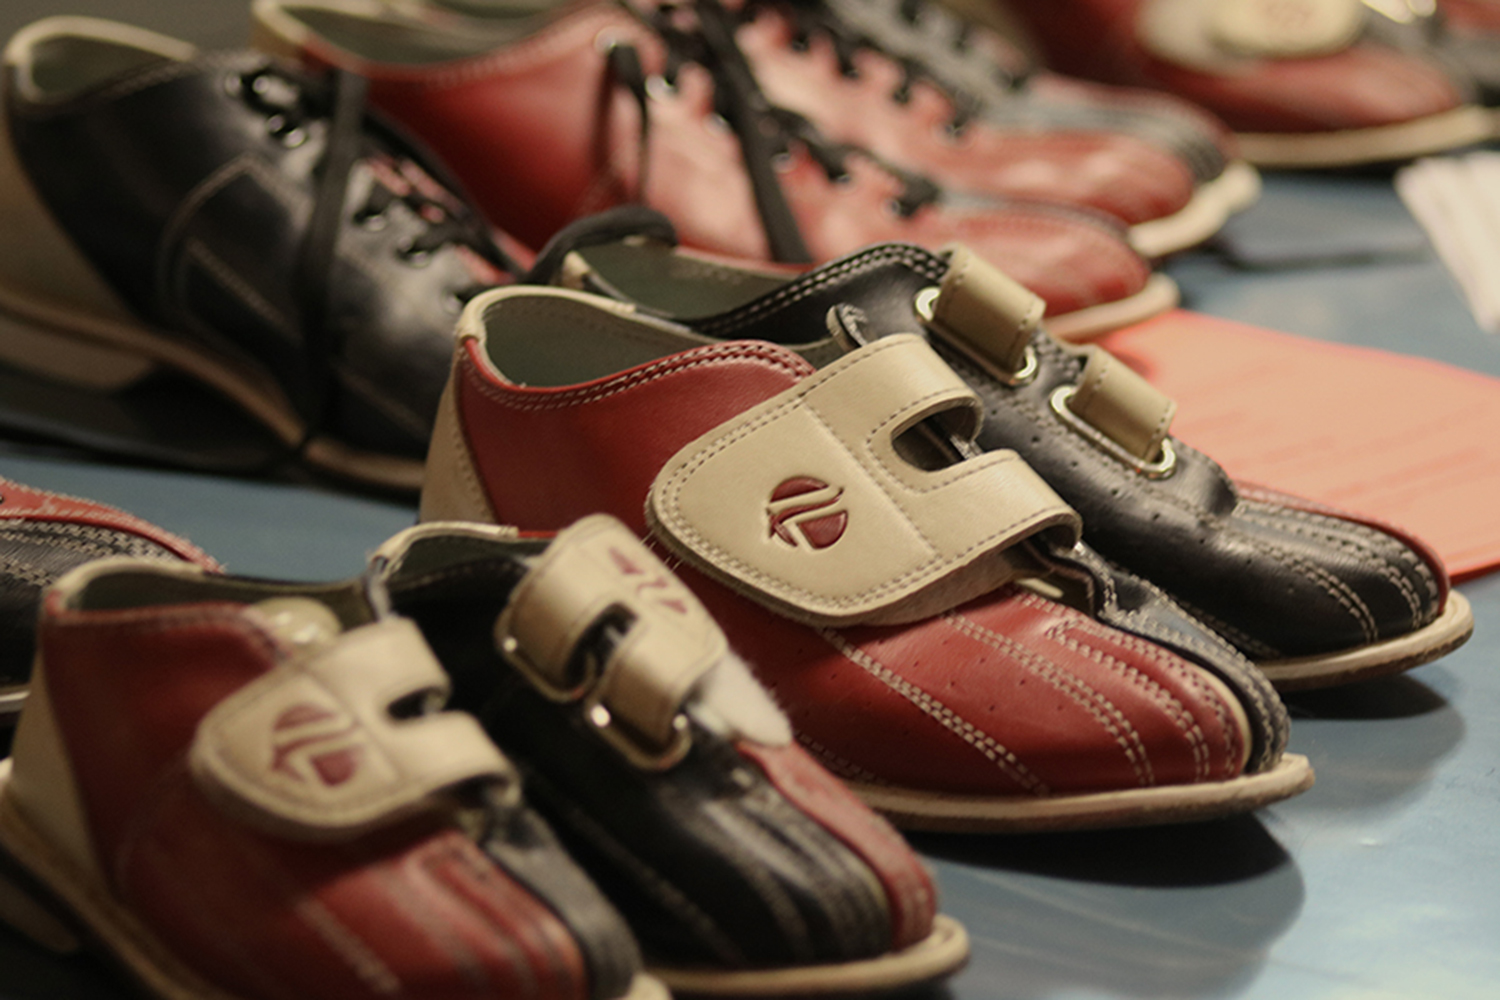 The Bowling shoes are lined up ready for people to grab and put on.